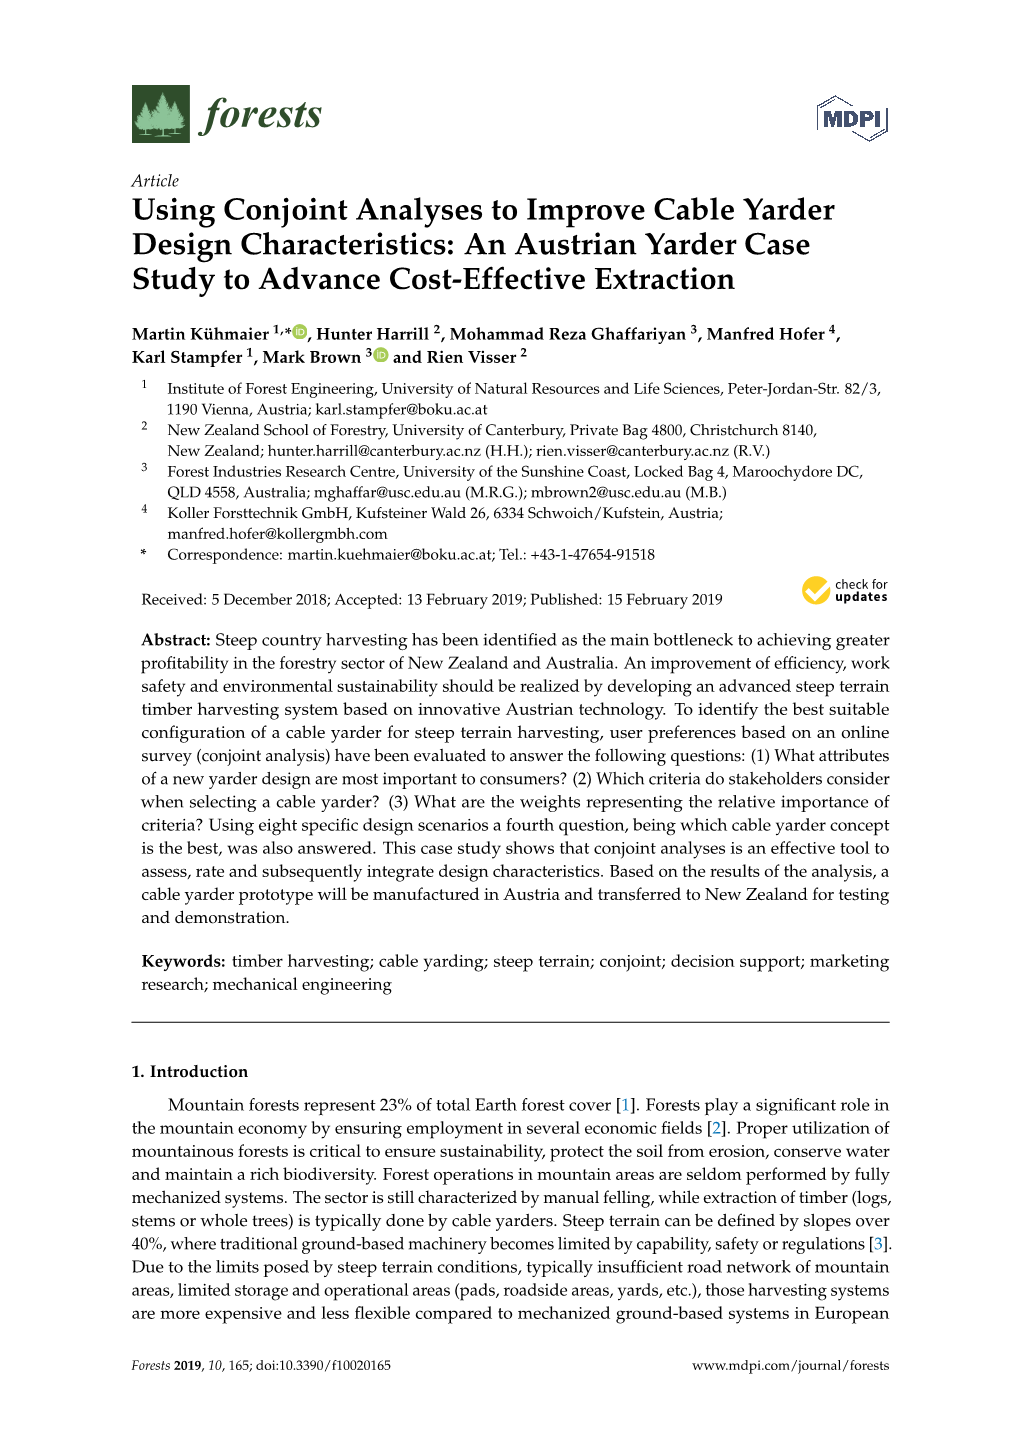 Using Conjoint Analyses to Improve Cable Yarder Design Characteristics: an Austrian Yarder Case Study to Advance Cost-Effective Extraction